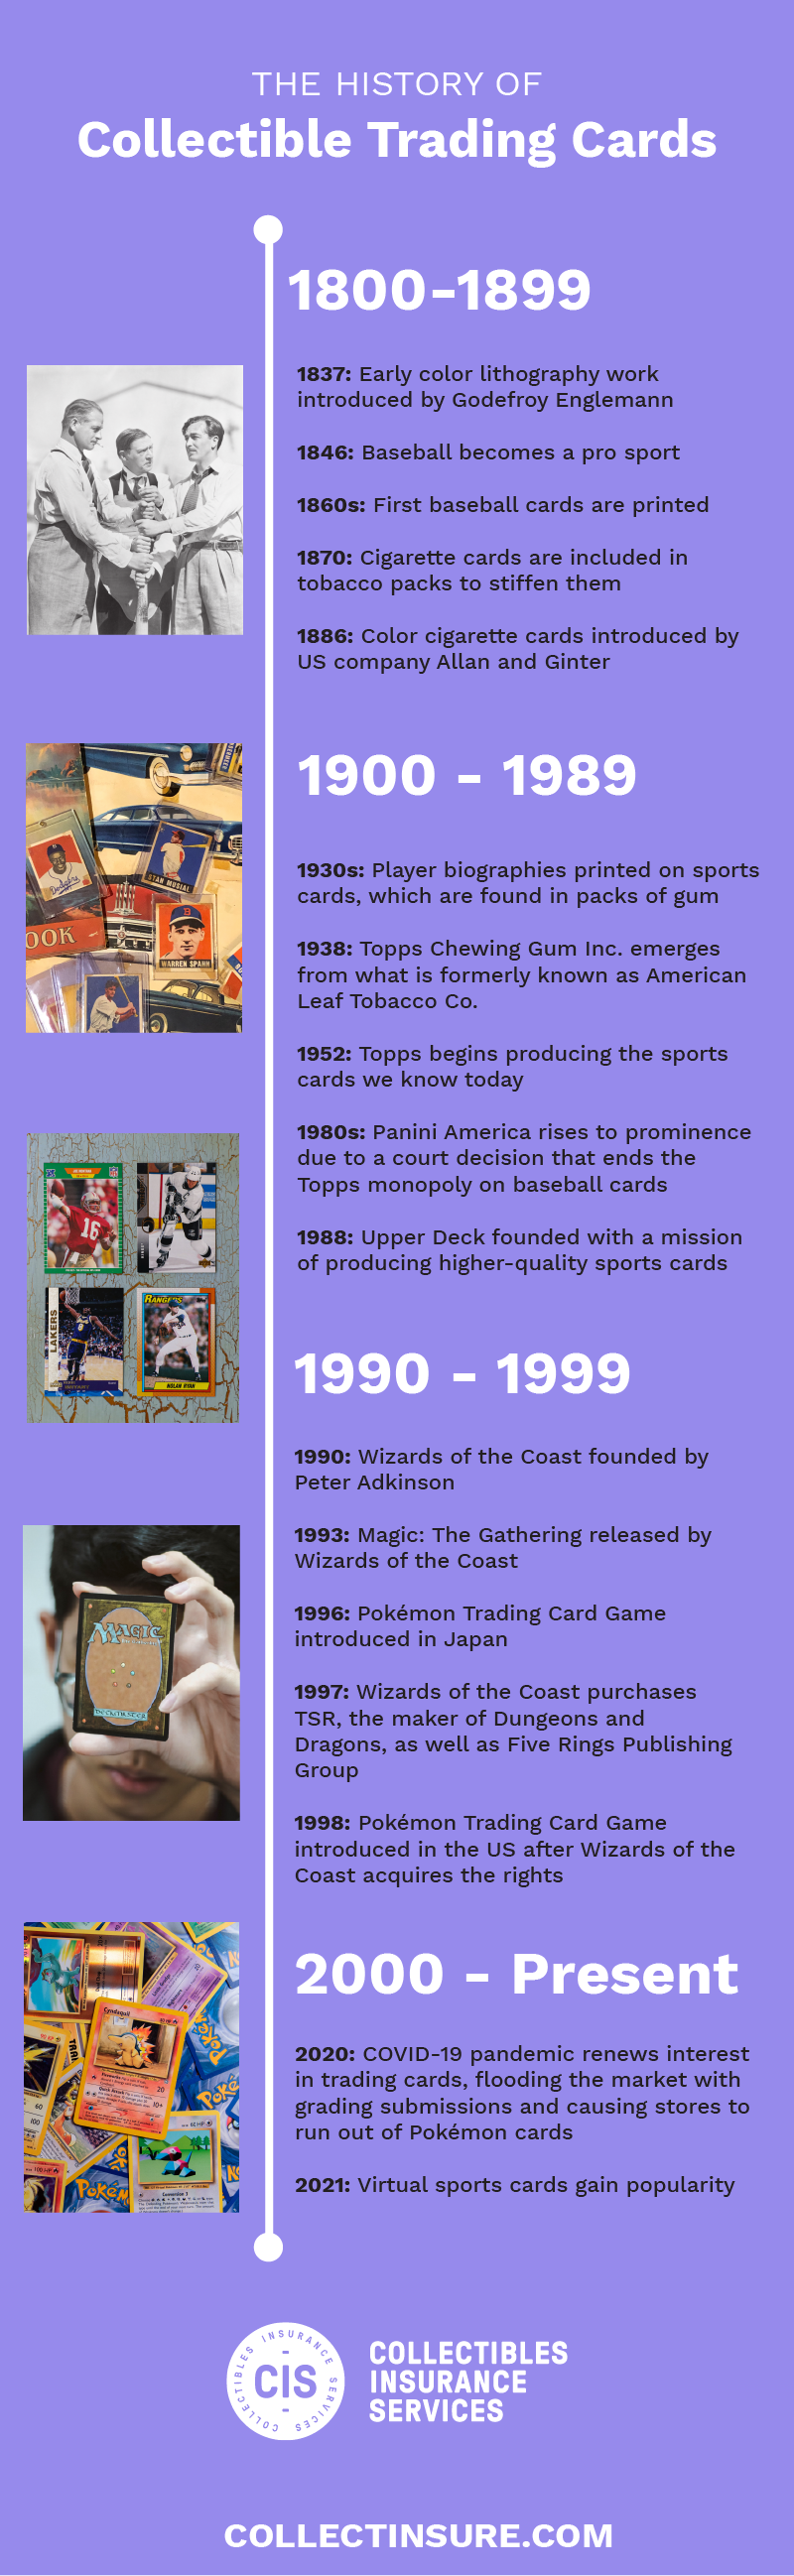 The History of Collectible Trading Cards - Collectibles Insurance